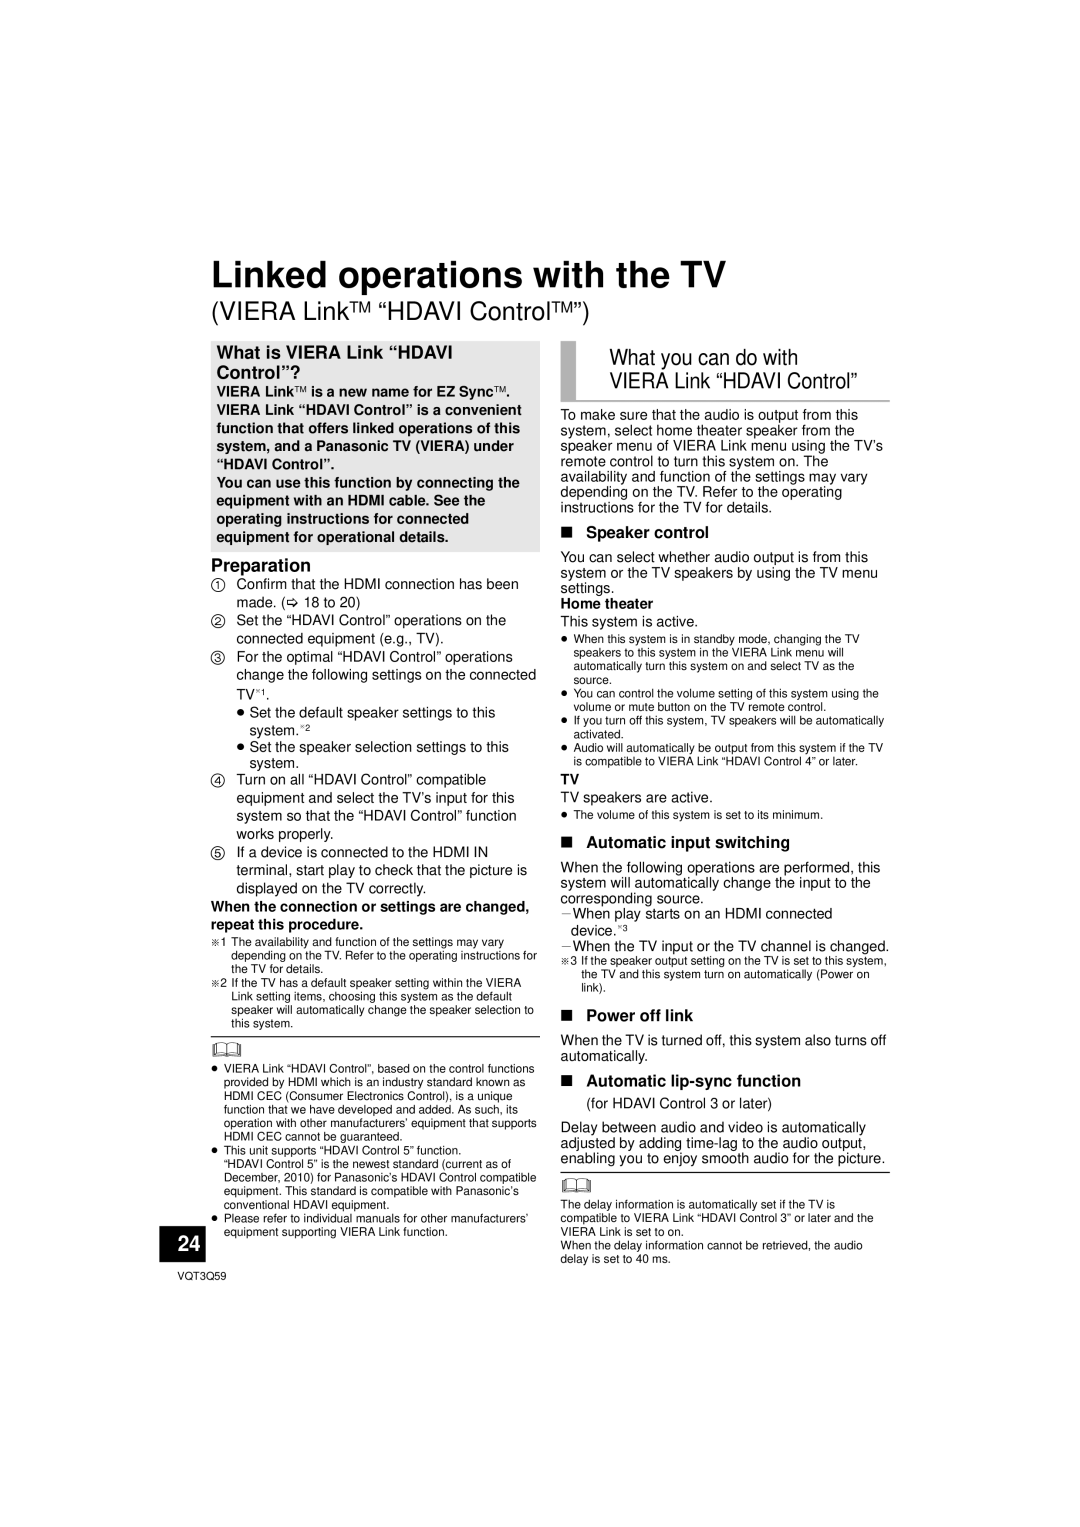 Panasonic SC-HTB15 Linked operations with the TV, VIERA LinkTM “HDAVI ControlTM”, What is VIERA Link “HDAVI Control”? 